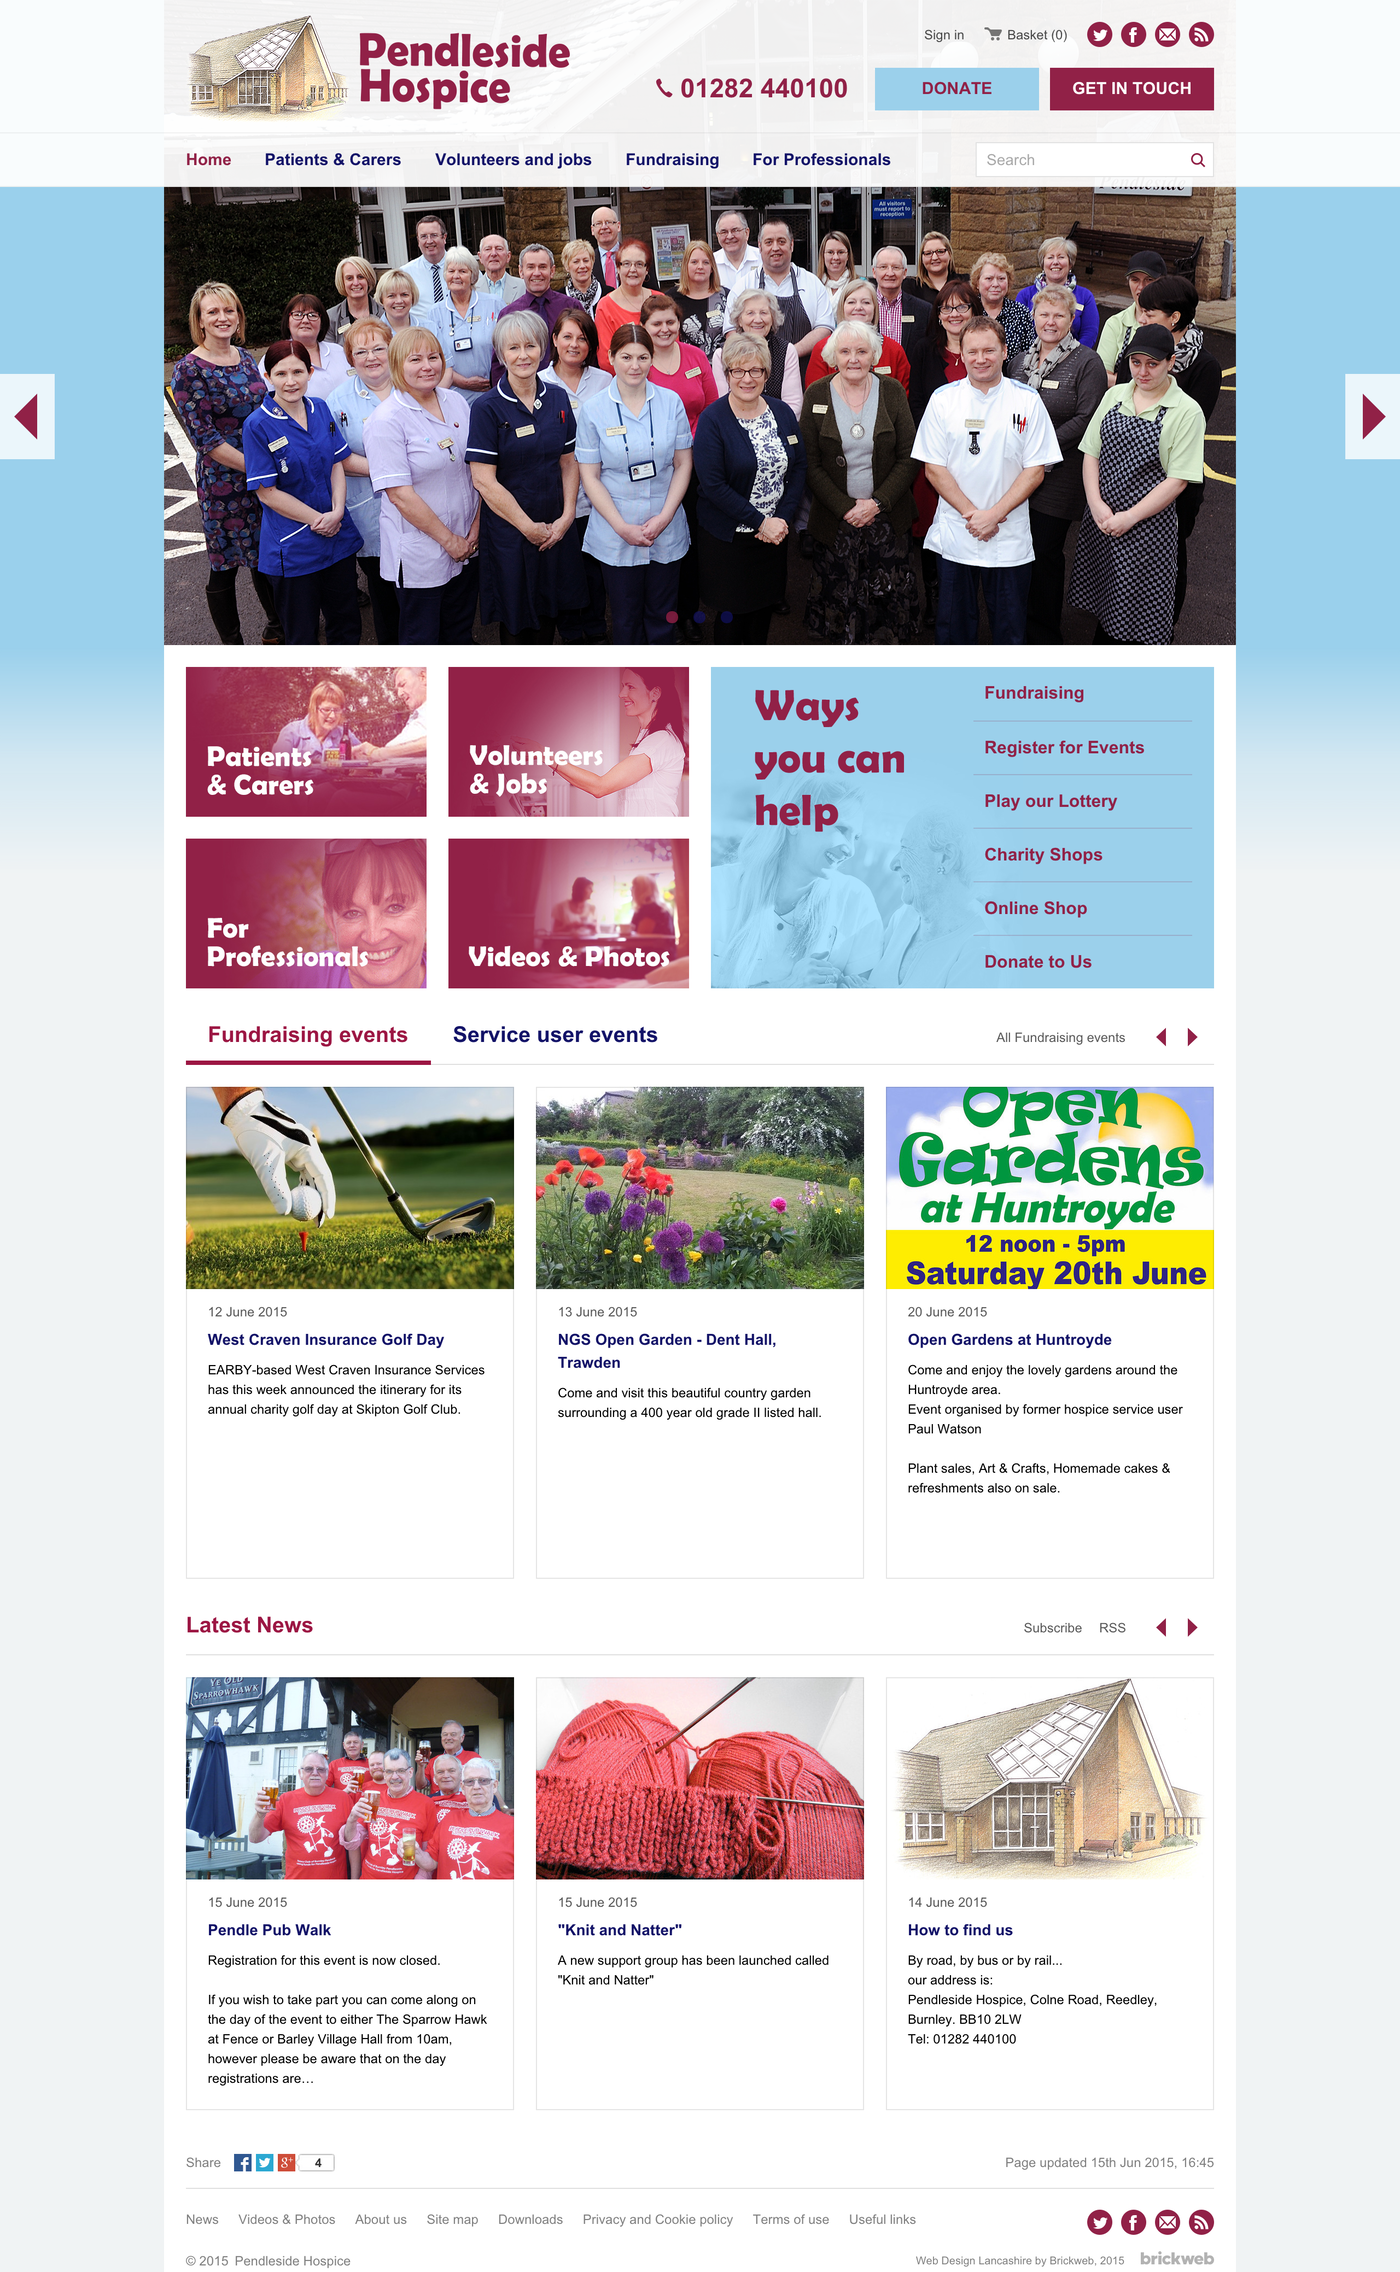 Pendleside Hospice Home page